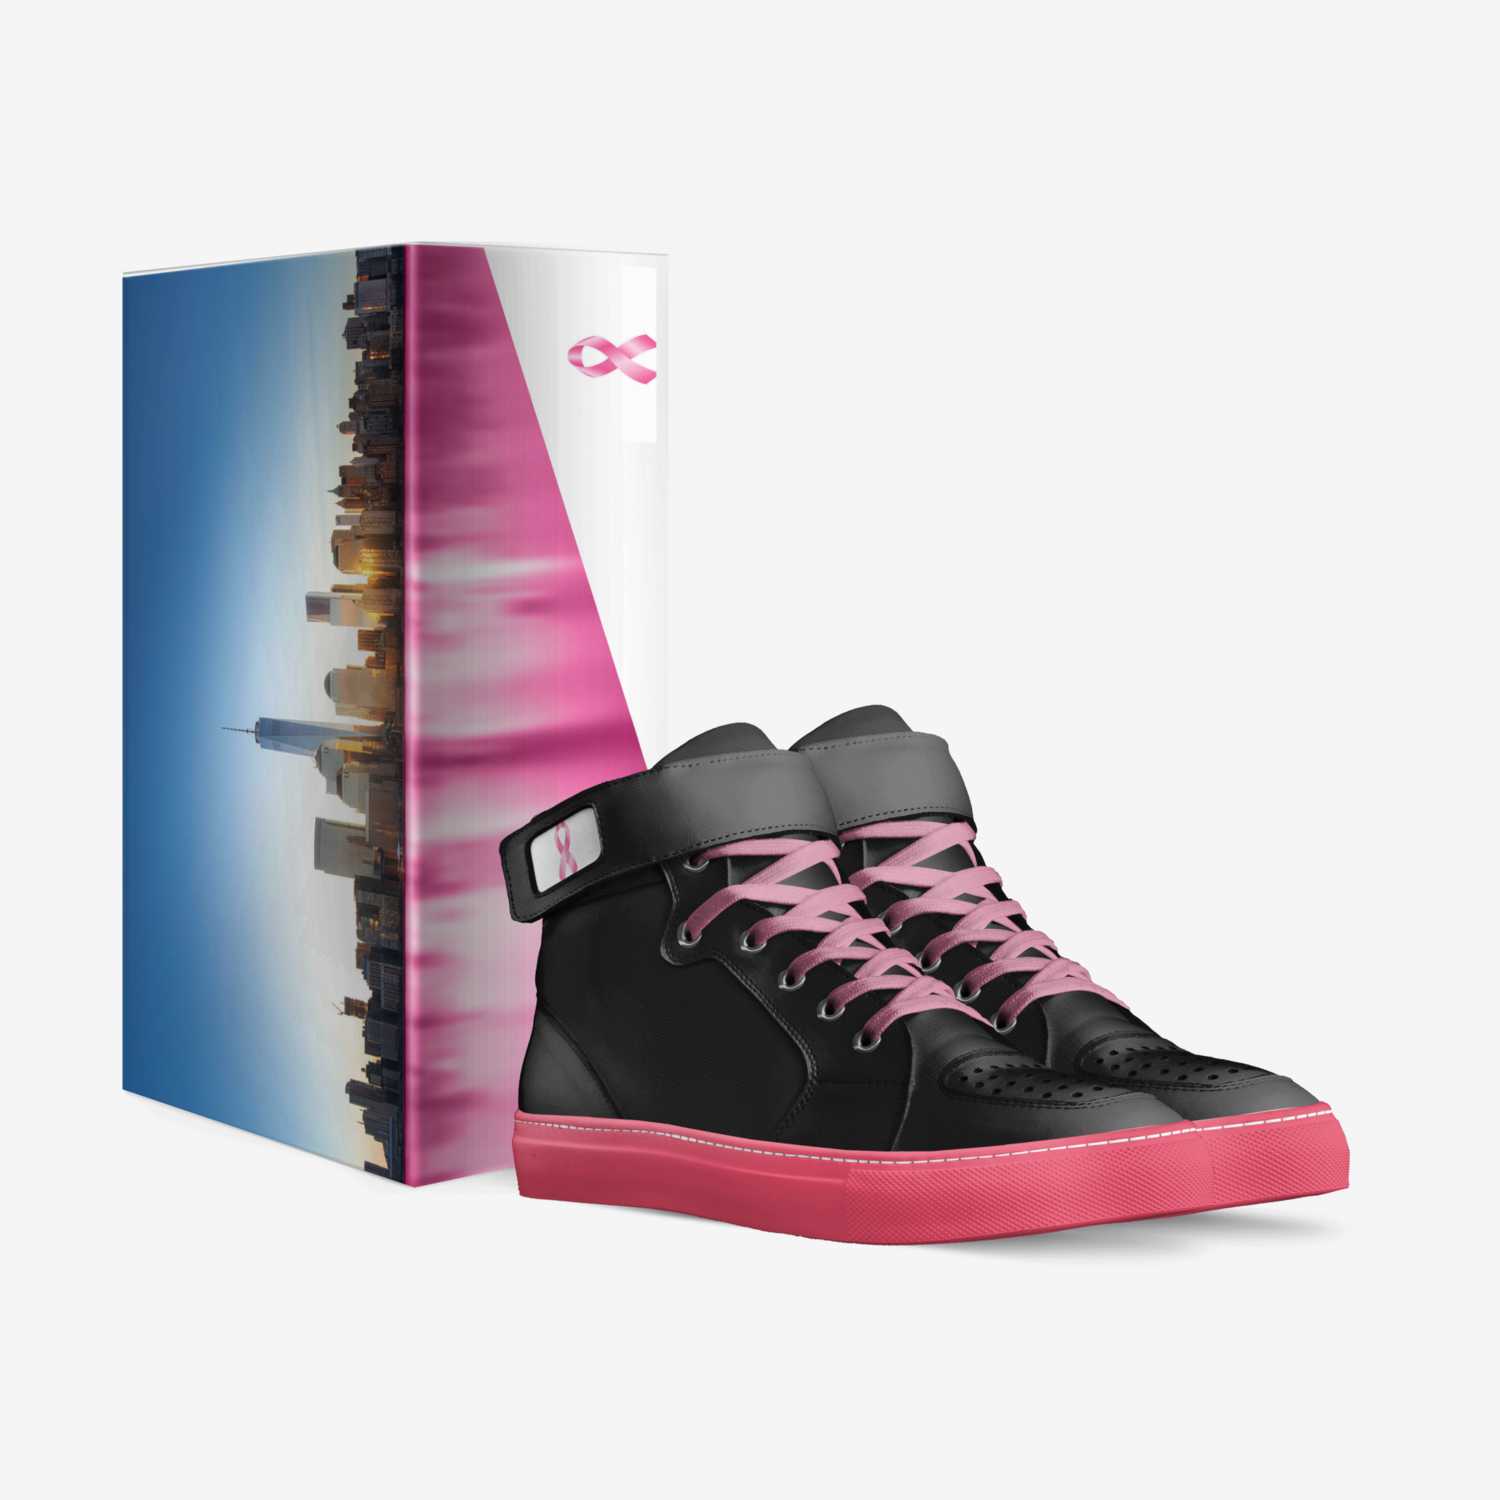 DM ‘brest cancer’ custom made in Italy shoes by Derek | Box view